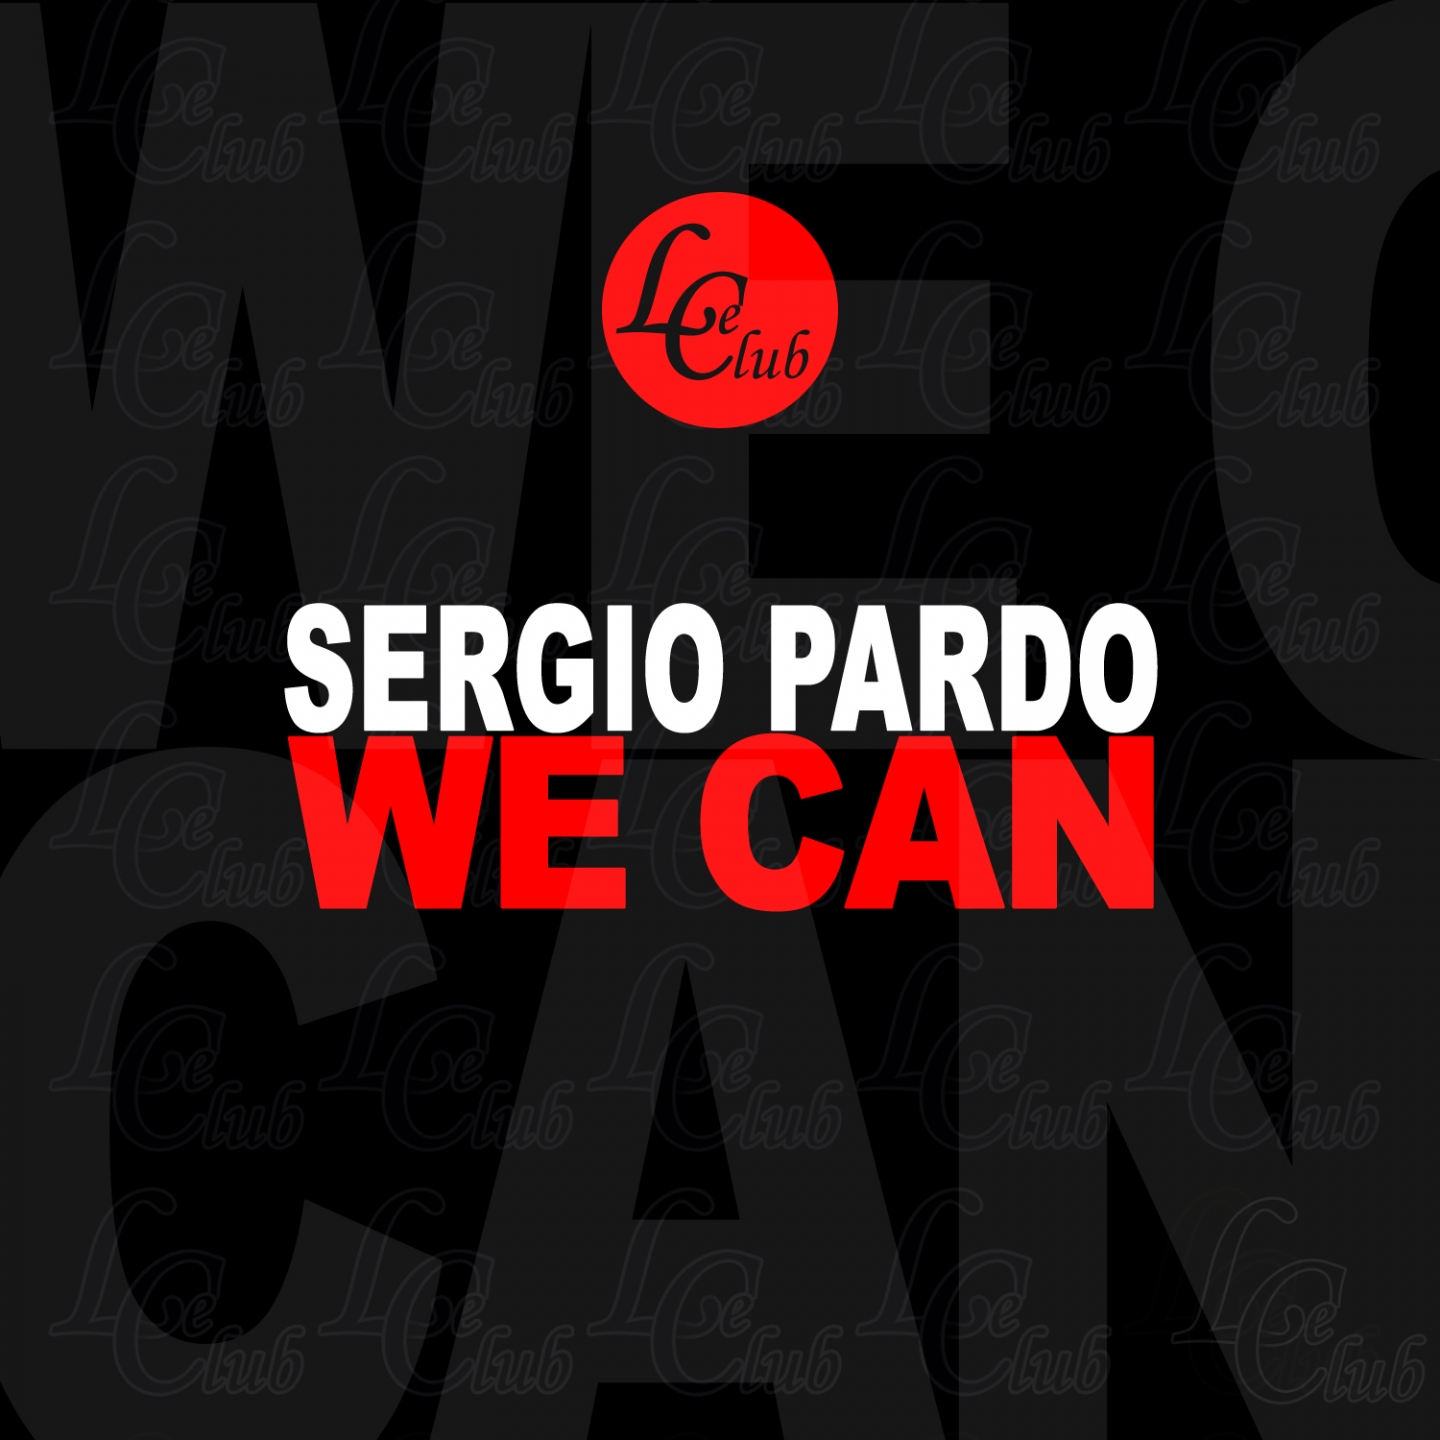 We Can